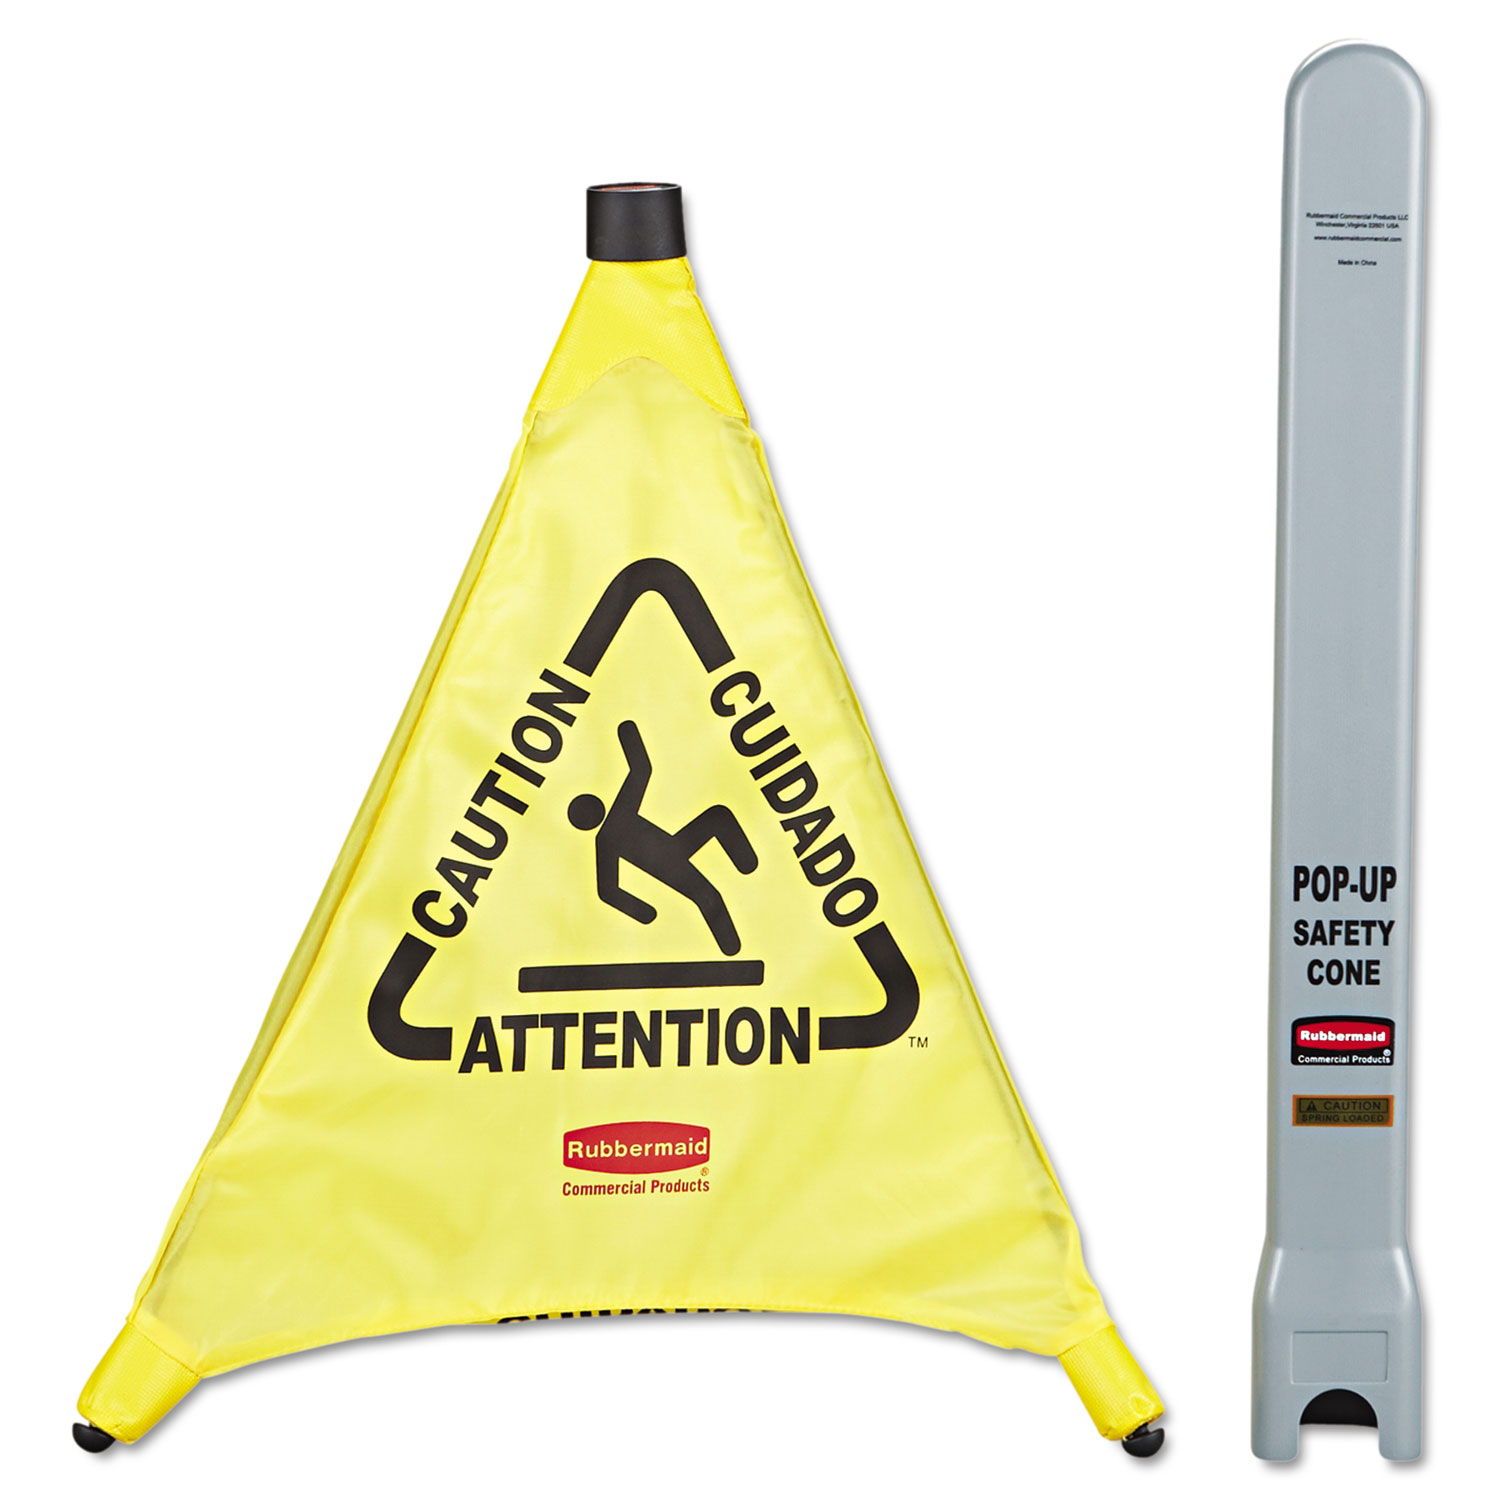  Rubbermaid Commercial FG9S0000YEL Multilingual Caution Pop-Up Safety Cone, 3-Sided, Fabric, 21 x 21 x 20, Yellow (RCP9S00YEL) 